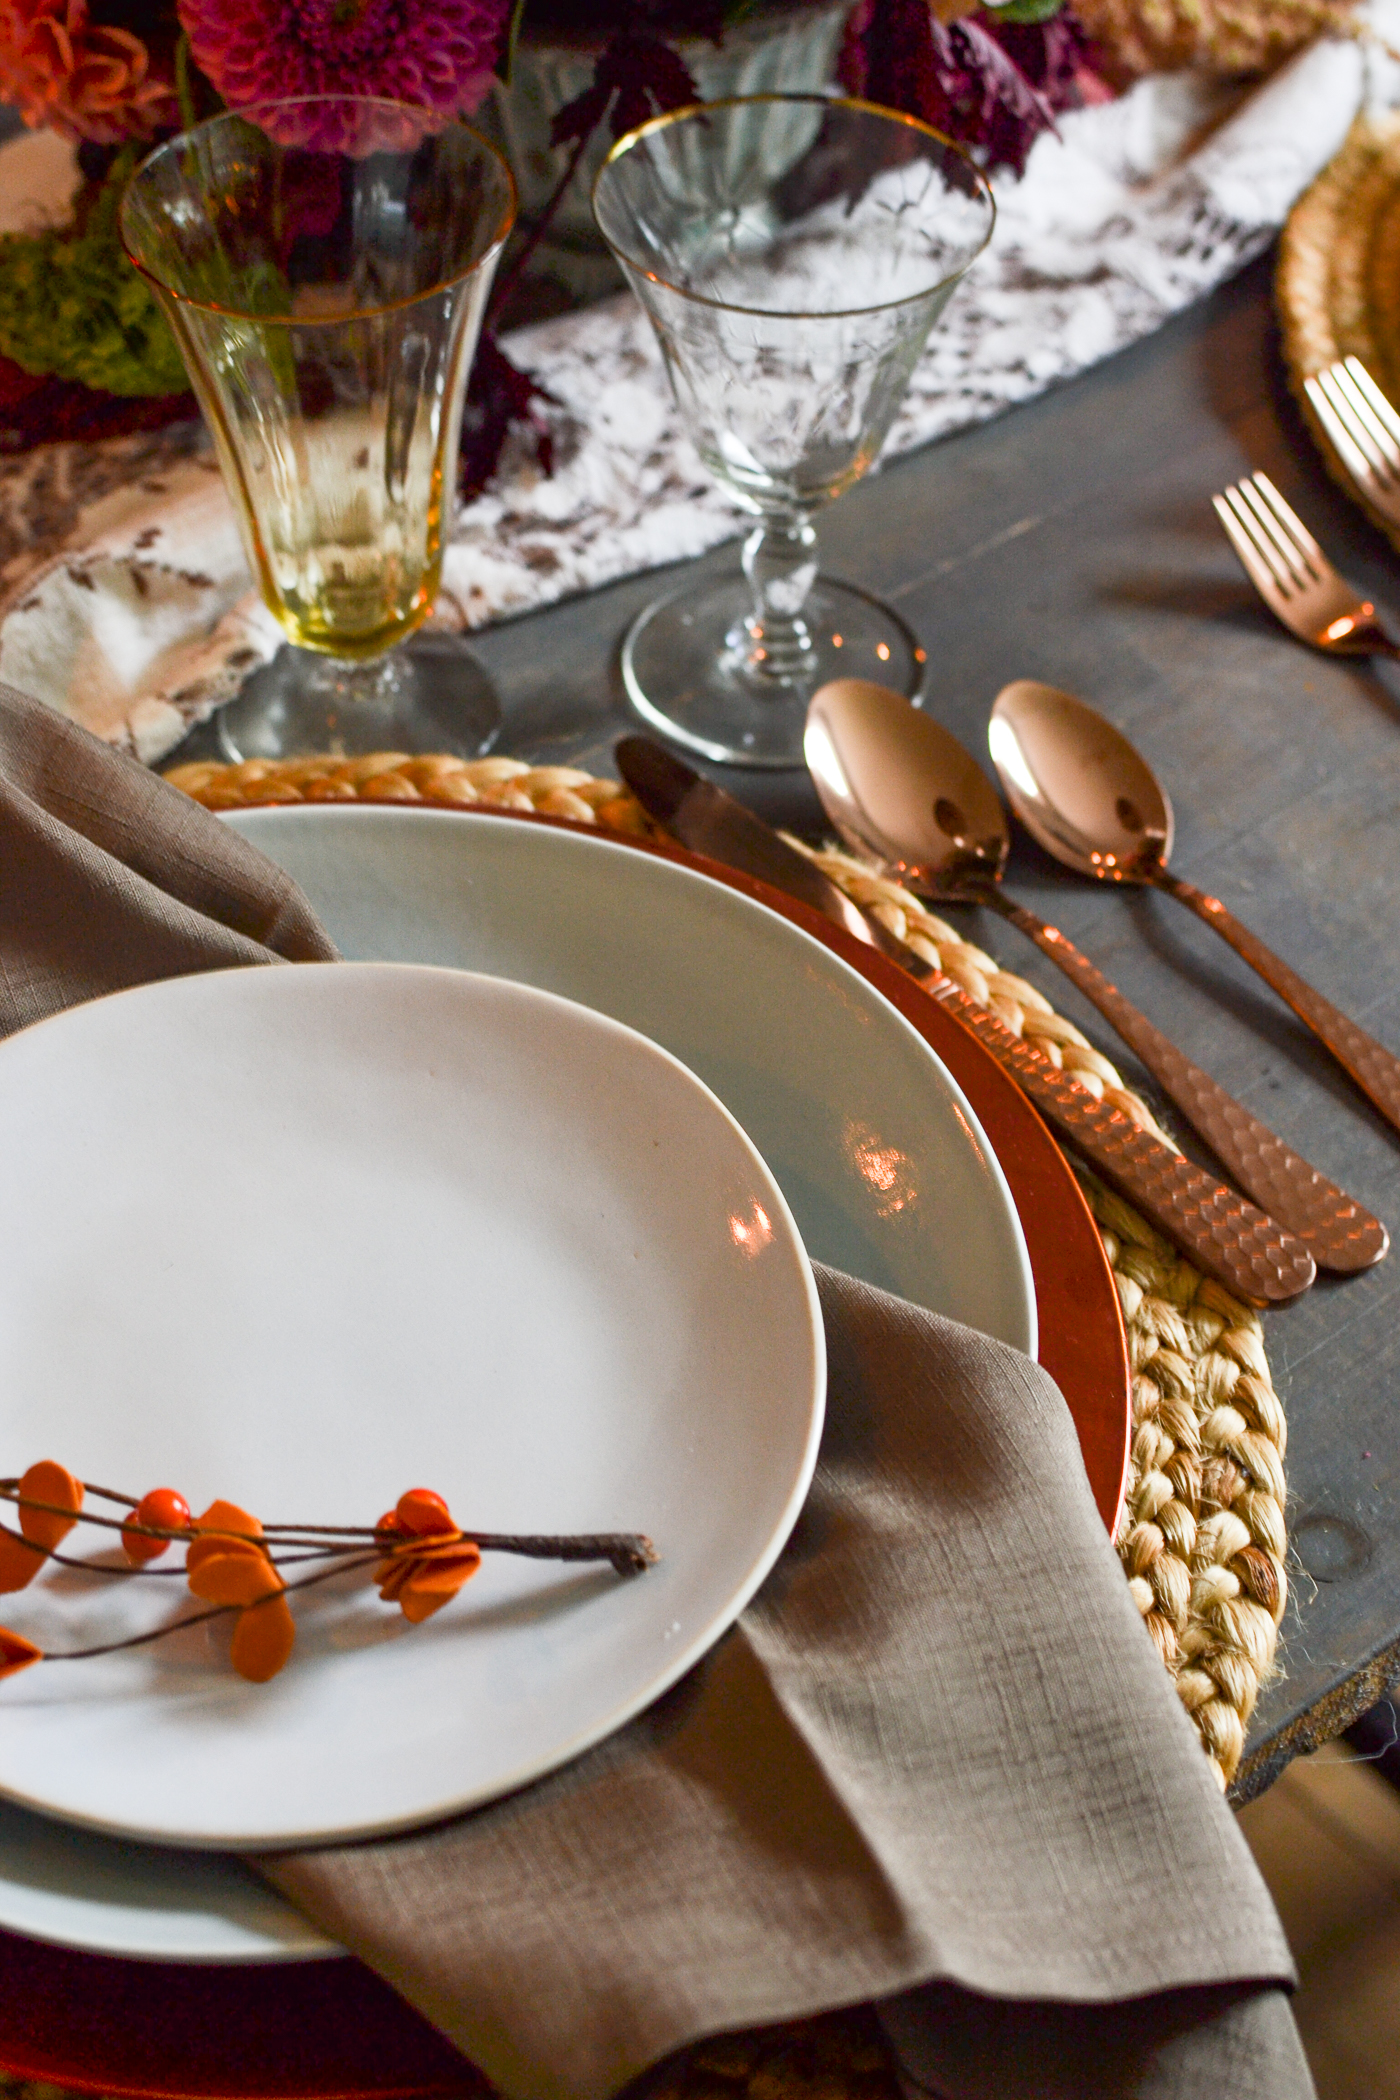 A table set with soft blue plates, brown napkins and copper flatware.